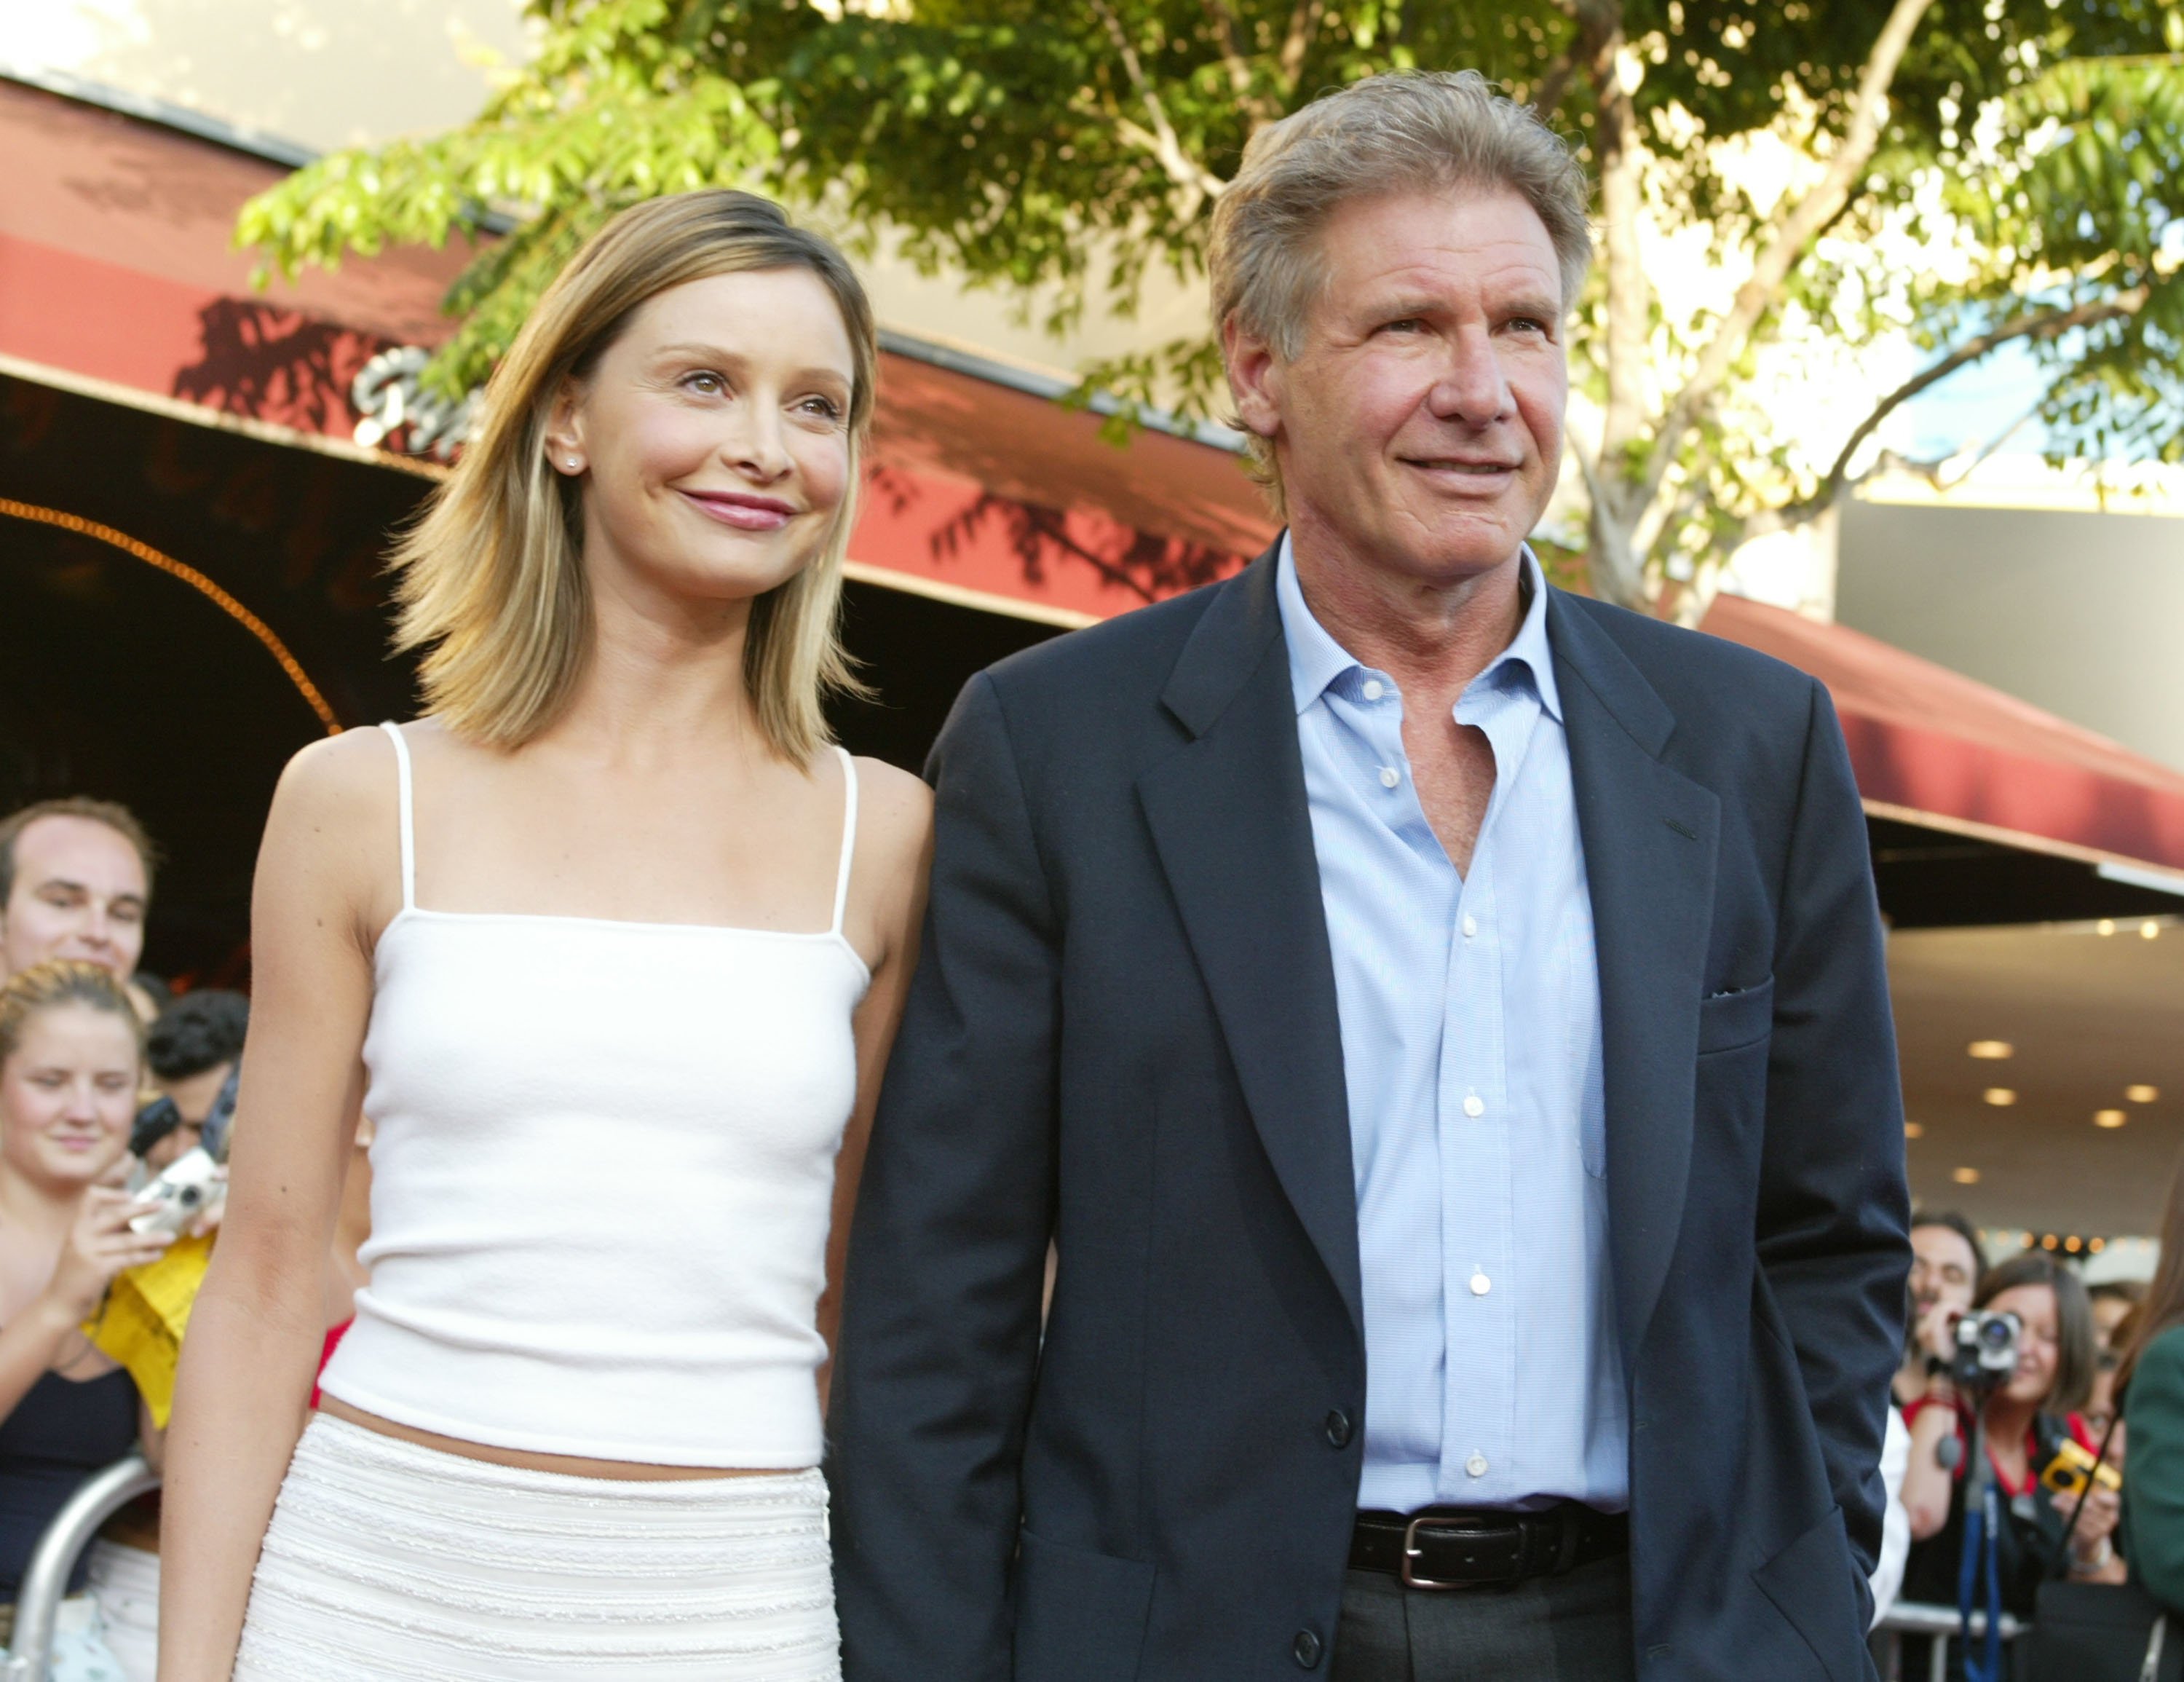 Calista Flockhart and Harrison Ford at the premiere of "K-19: The Widowmaker" in Westwood, California. on July 15, 2002 | Source: Getty Images